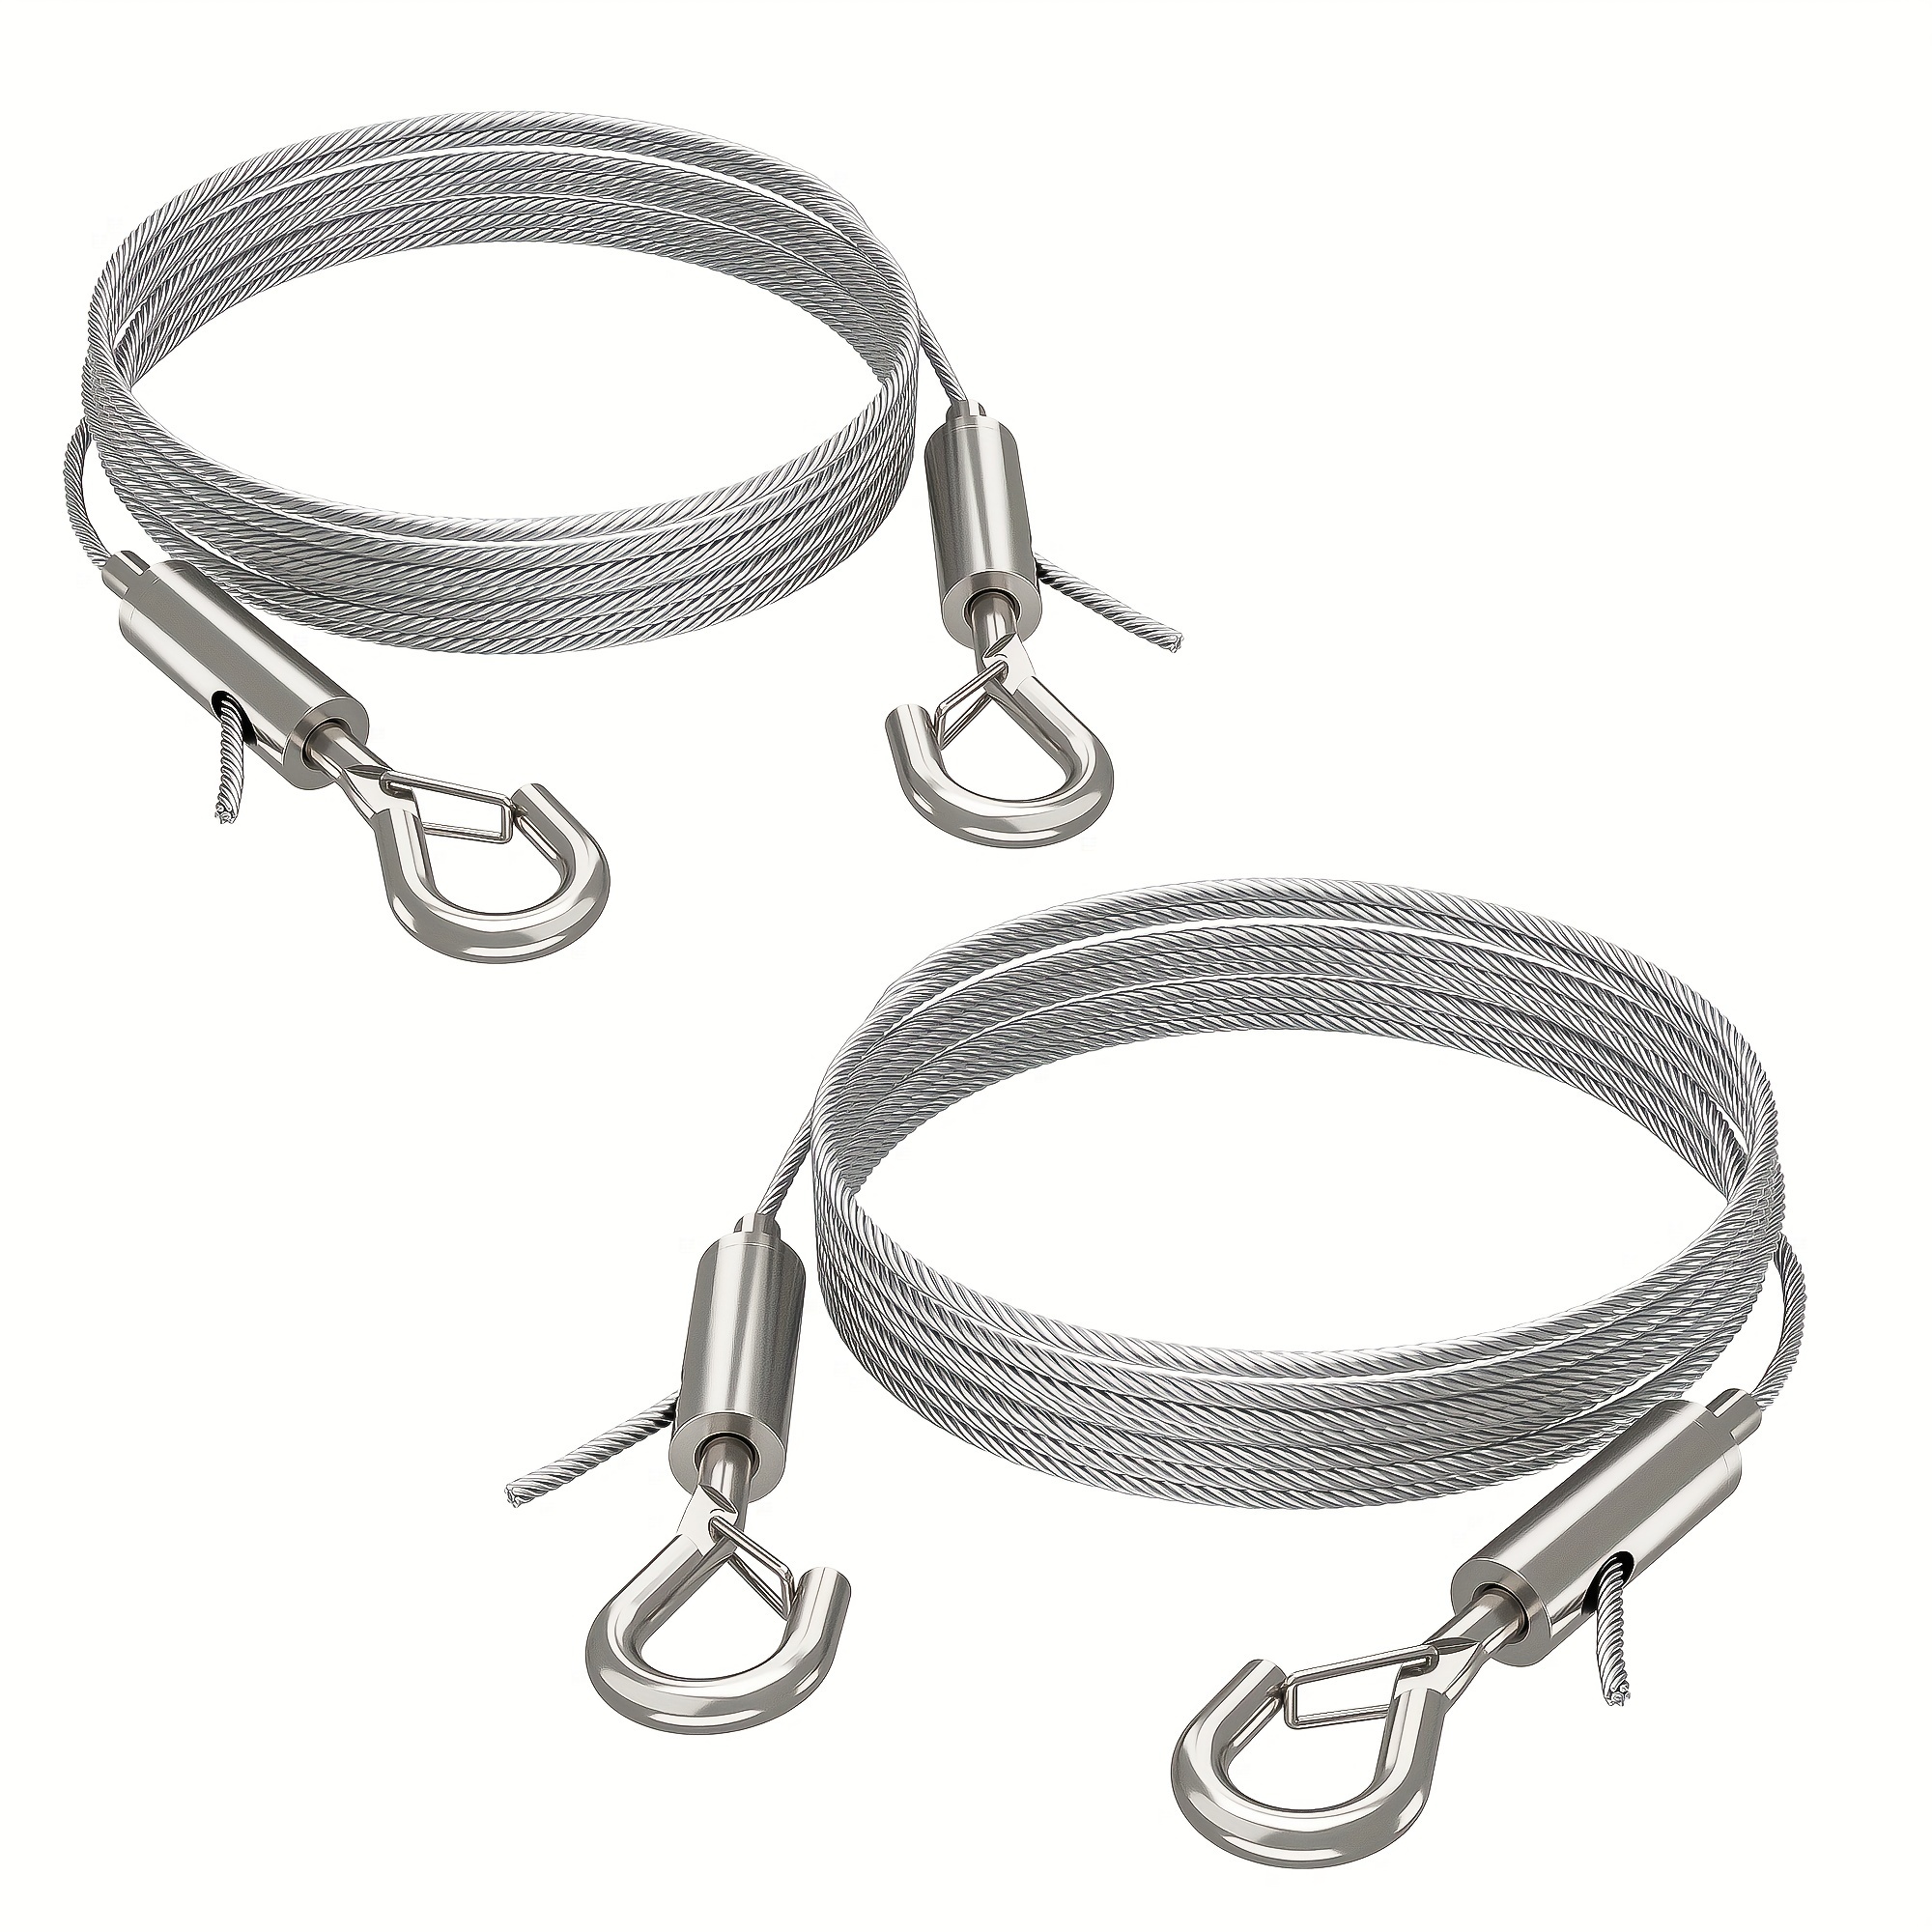 

2pcs Stainless Steel Wire Rope Automatic Wire Rope With Lock 2 Hooks For Panel Light Picture Diy Lamp Hanger 2 Meter Adjustable Wire Rope Suspension Steel Rope